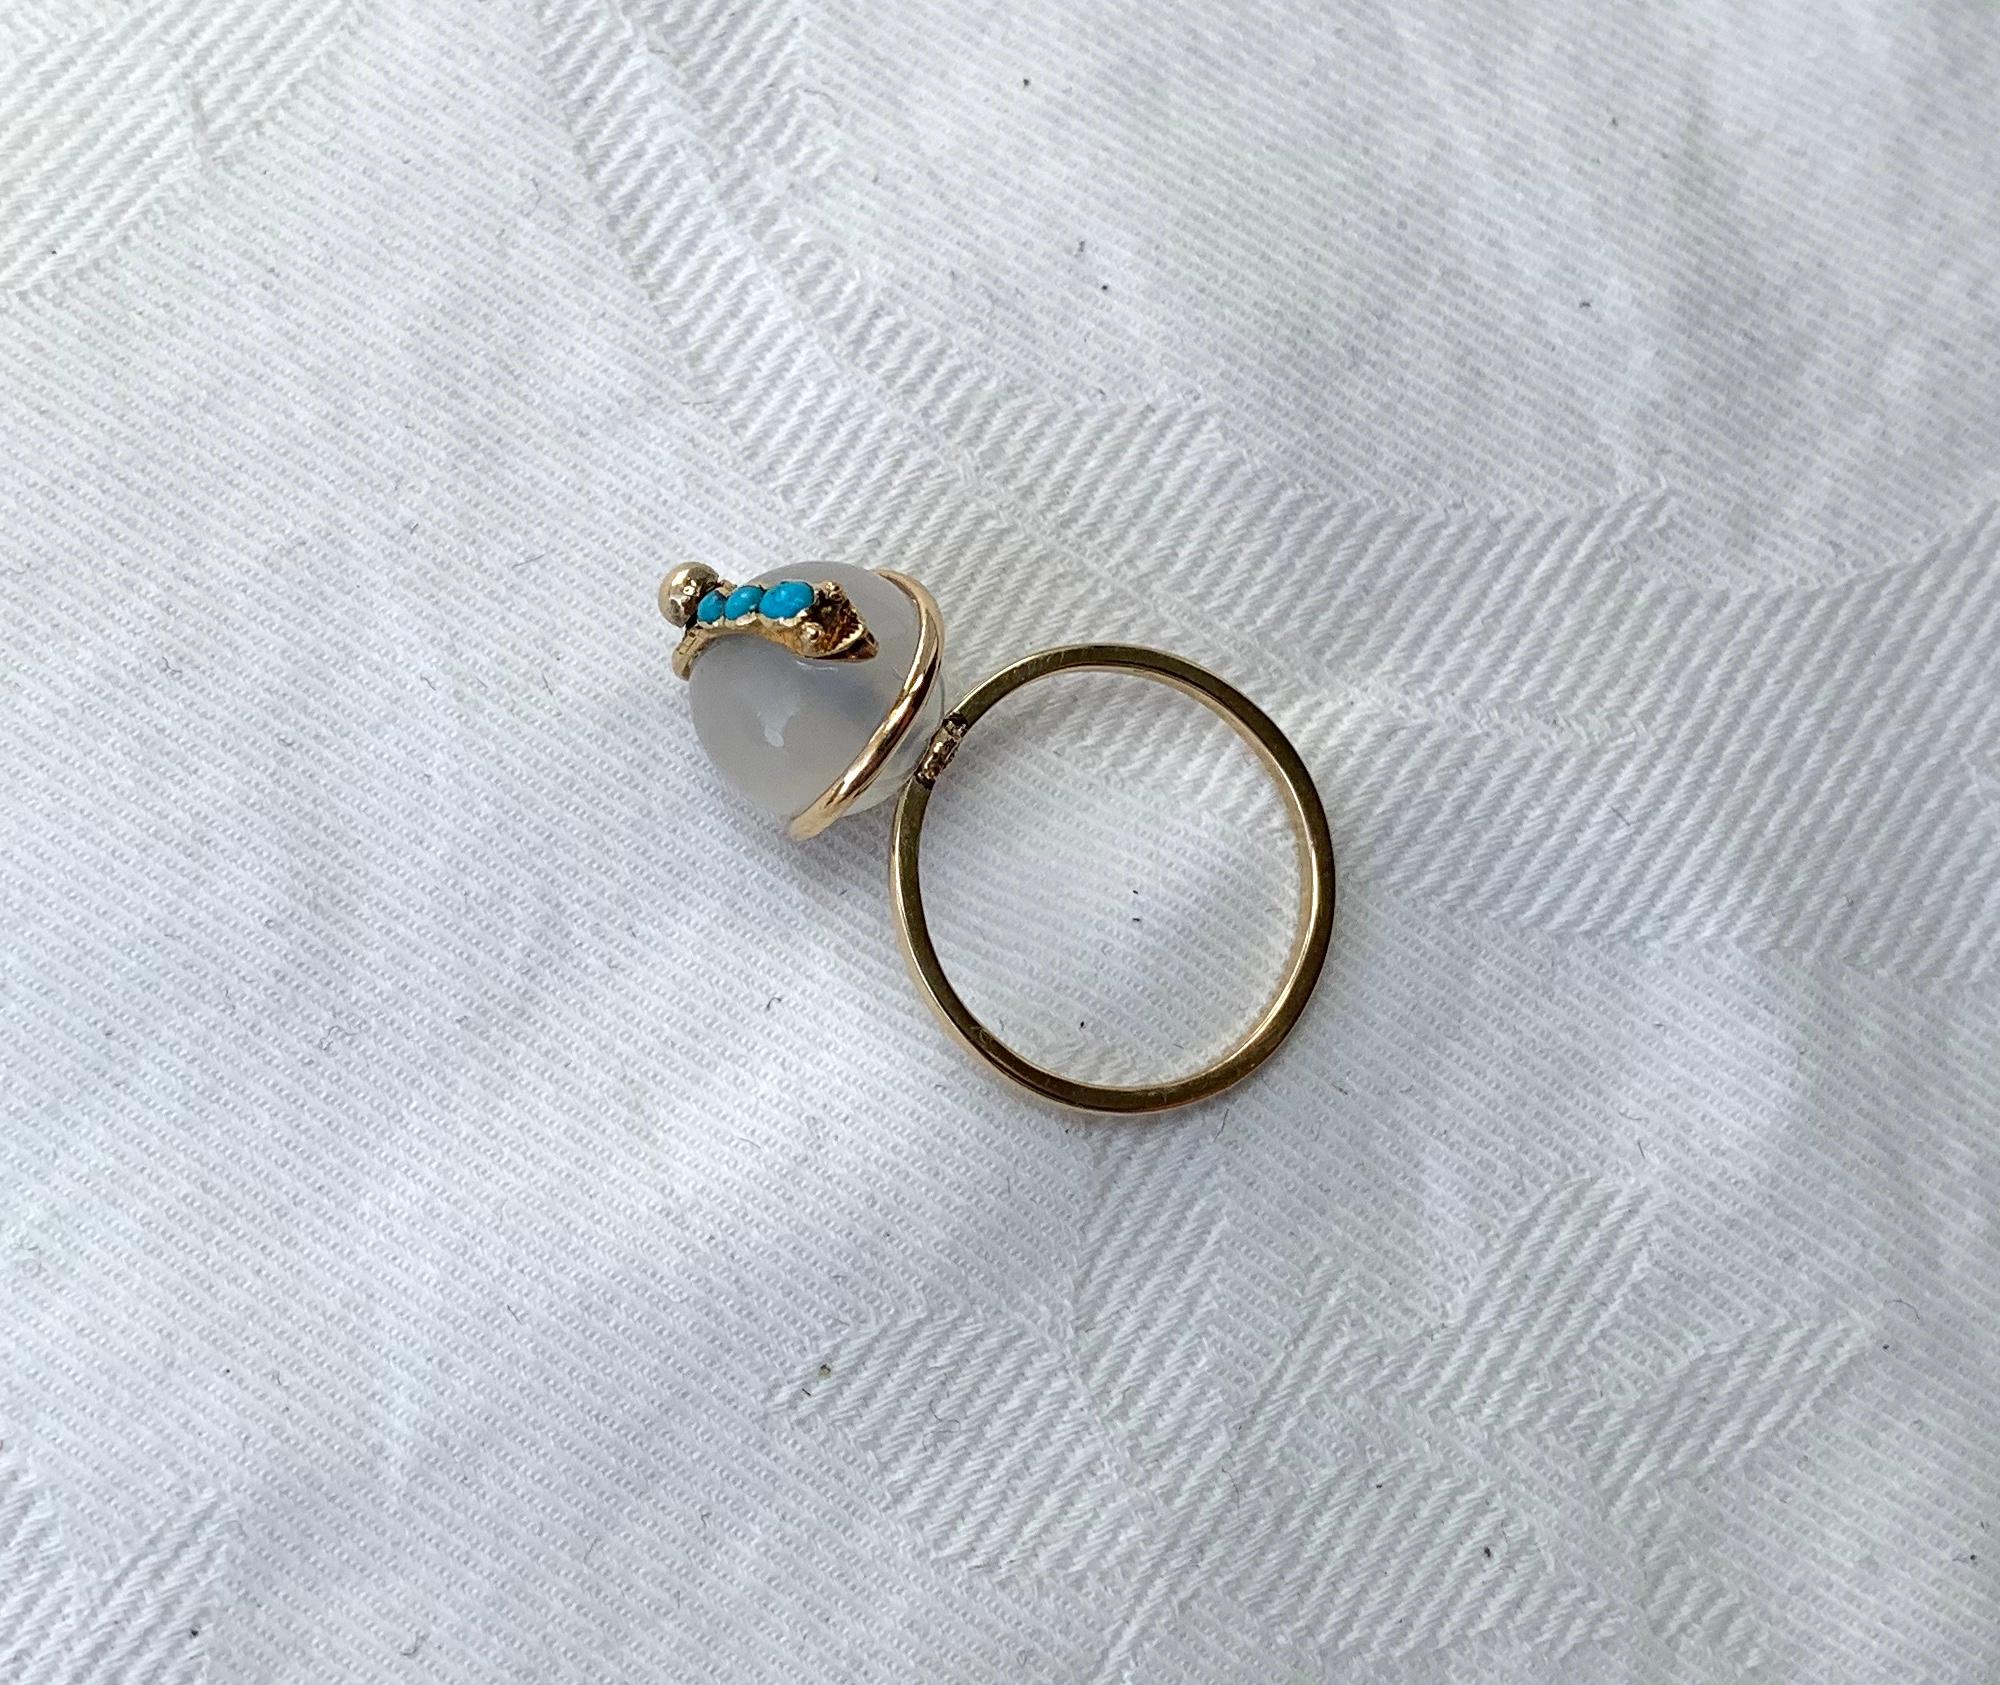 Women's Victorian Snake Globe Ring Turquoise Moonstone Gold Antique Serpent For Sale